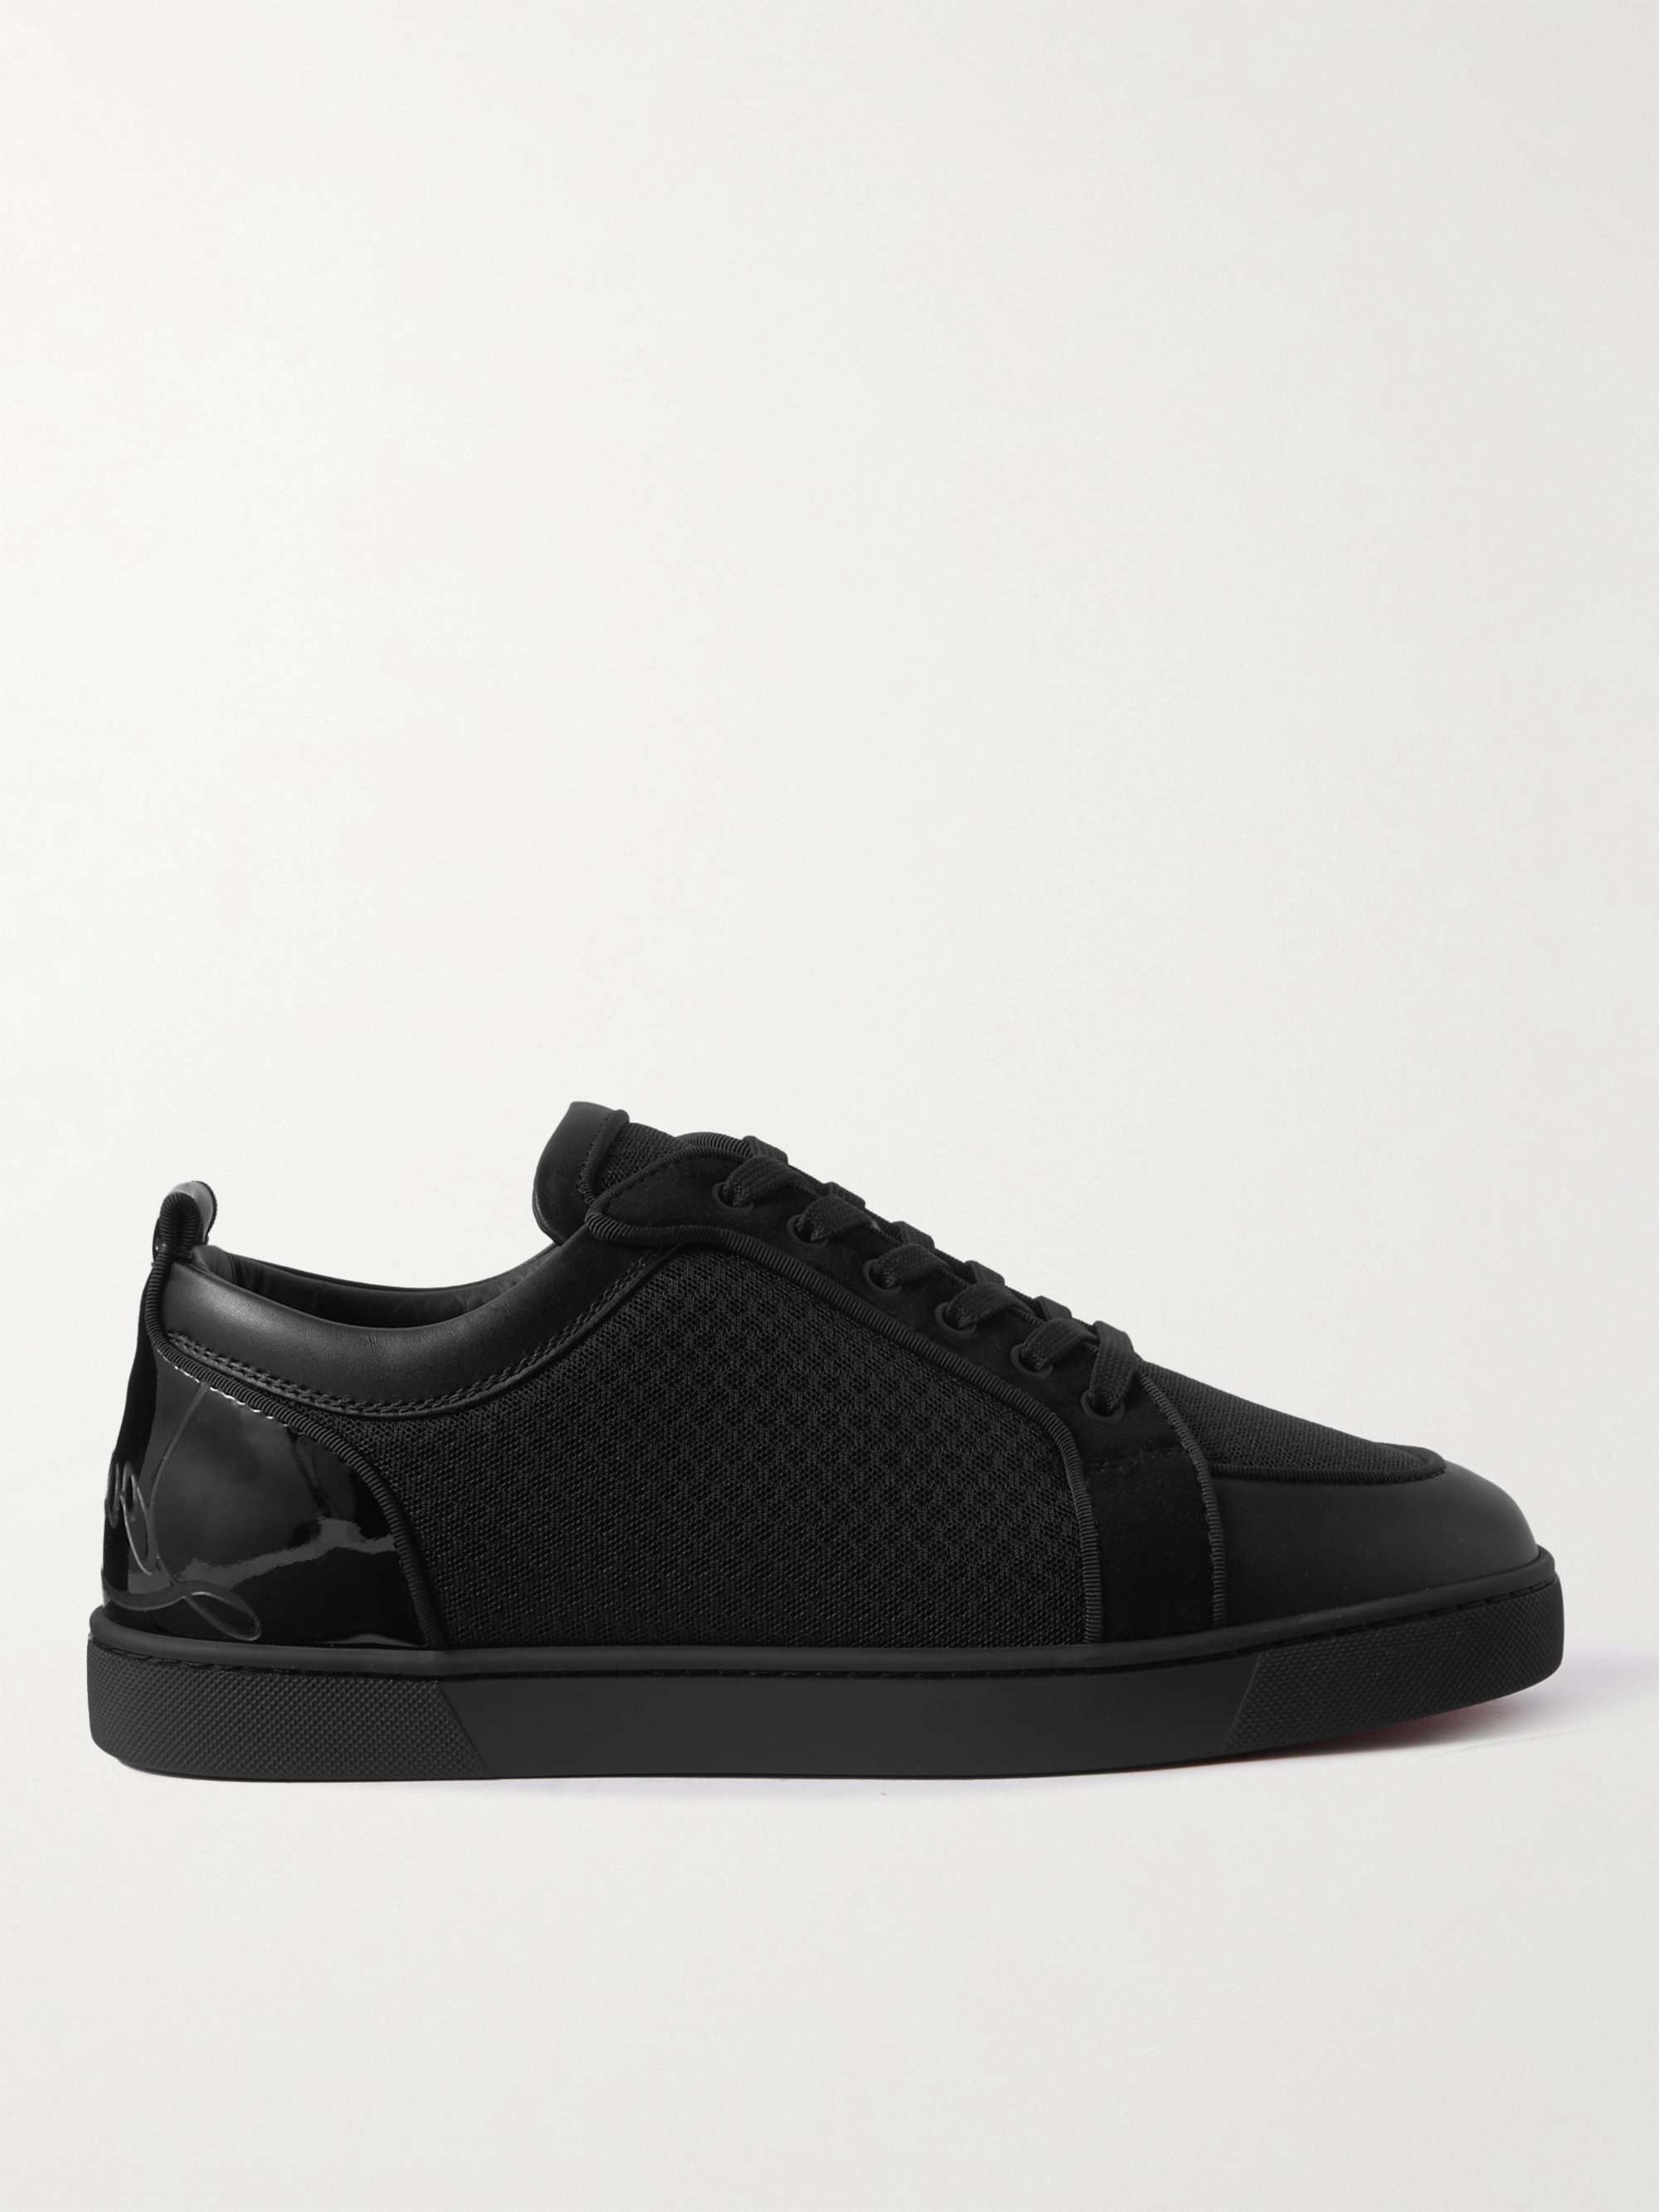 Black Suede-Trimmed Leather and Mesh Sneakers | CHRISTIAN LOUBOUTIN | MR  PORTER